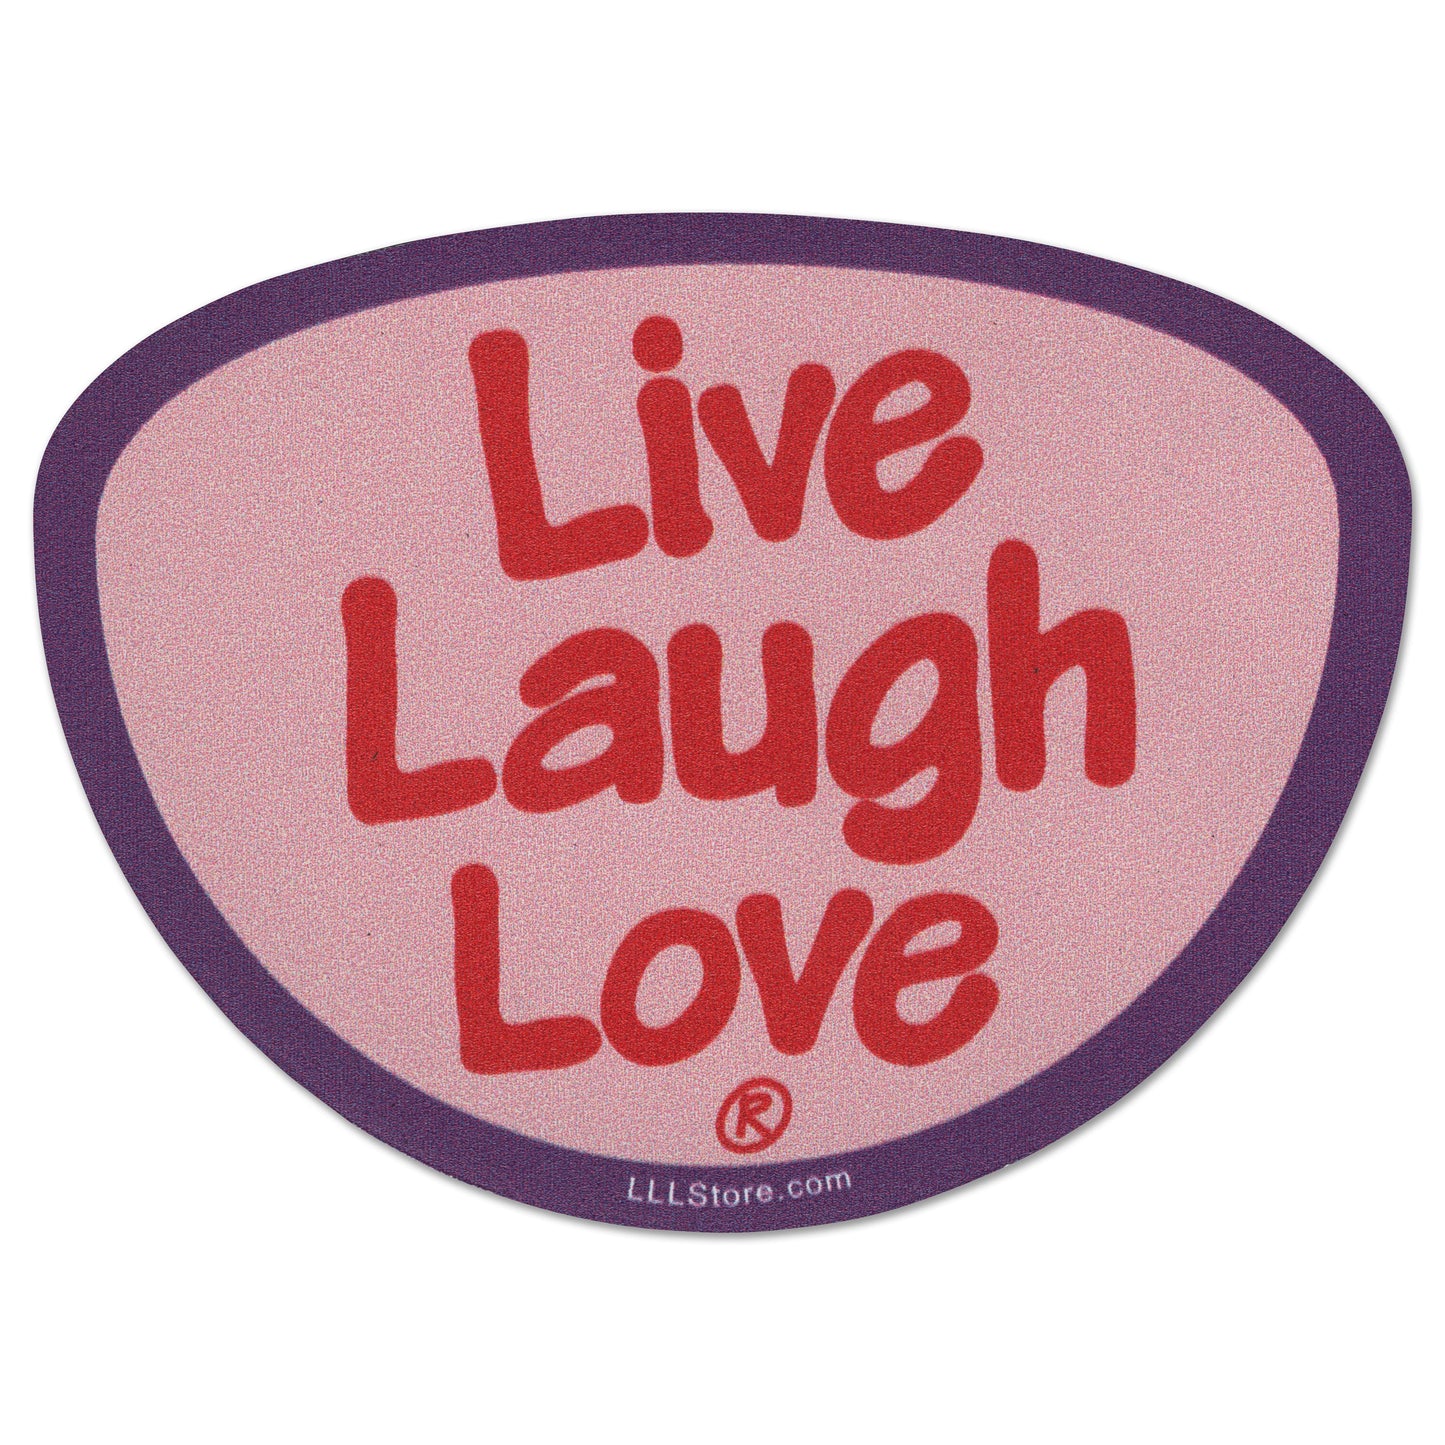 Live Laugh Love® Decorative Message Magnet - Red on Pink